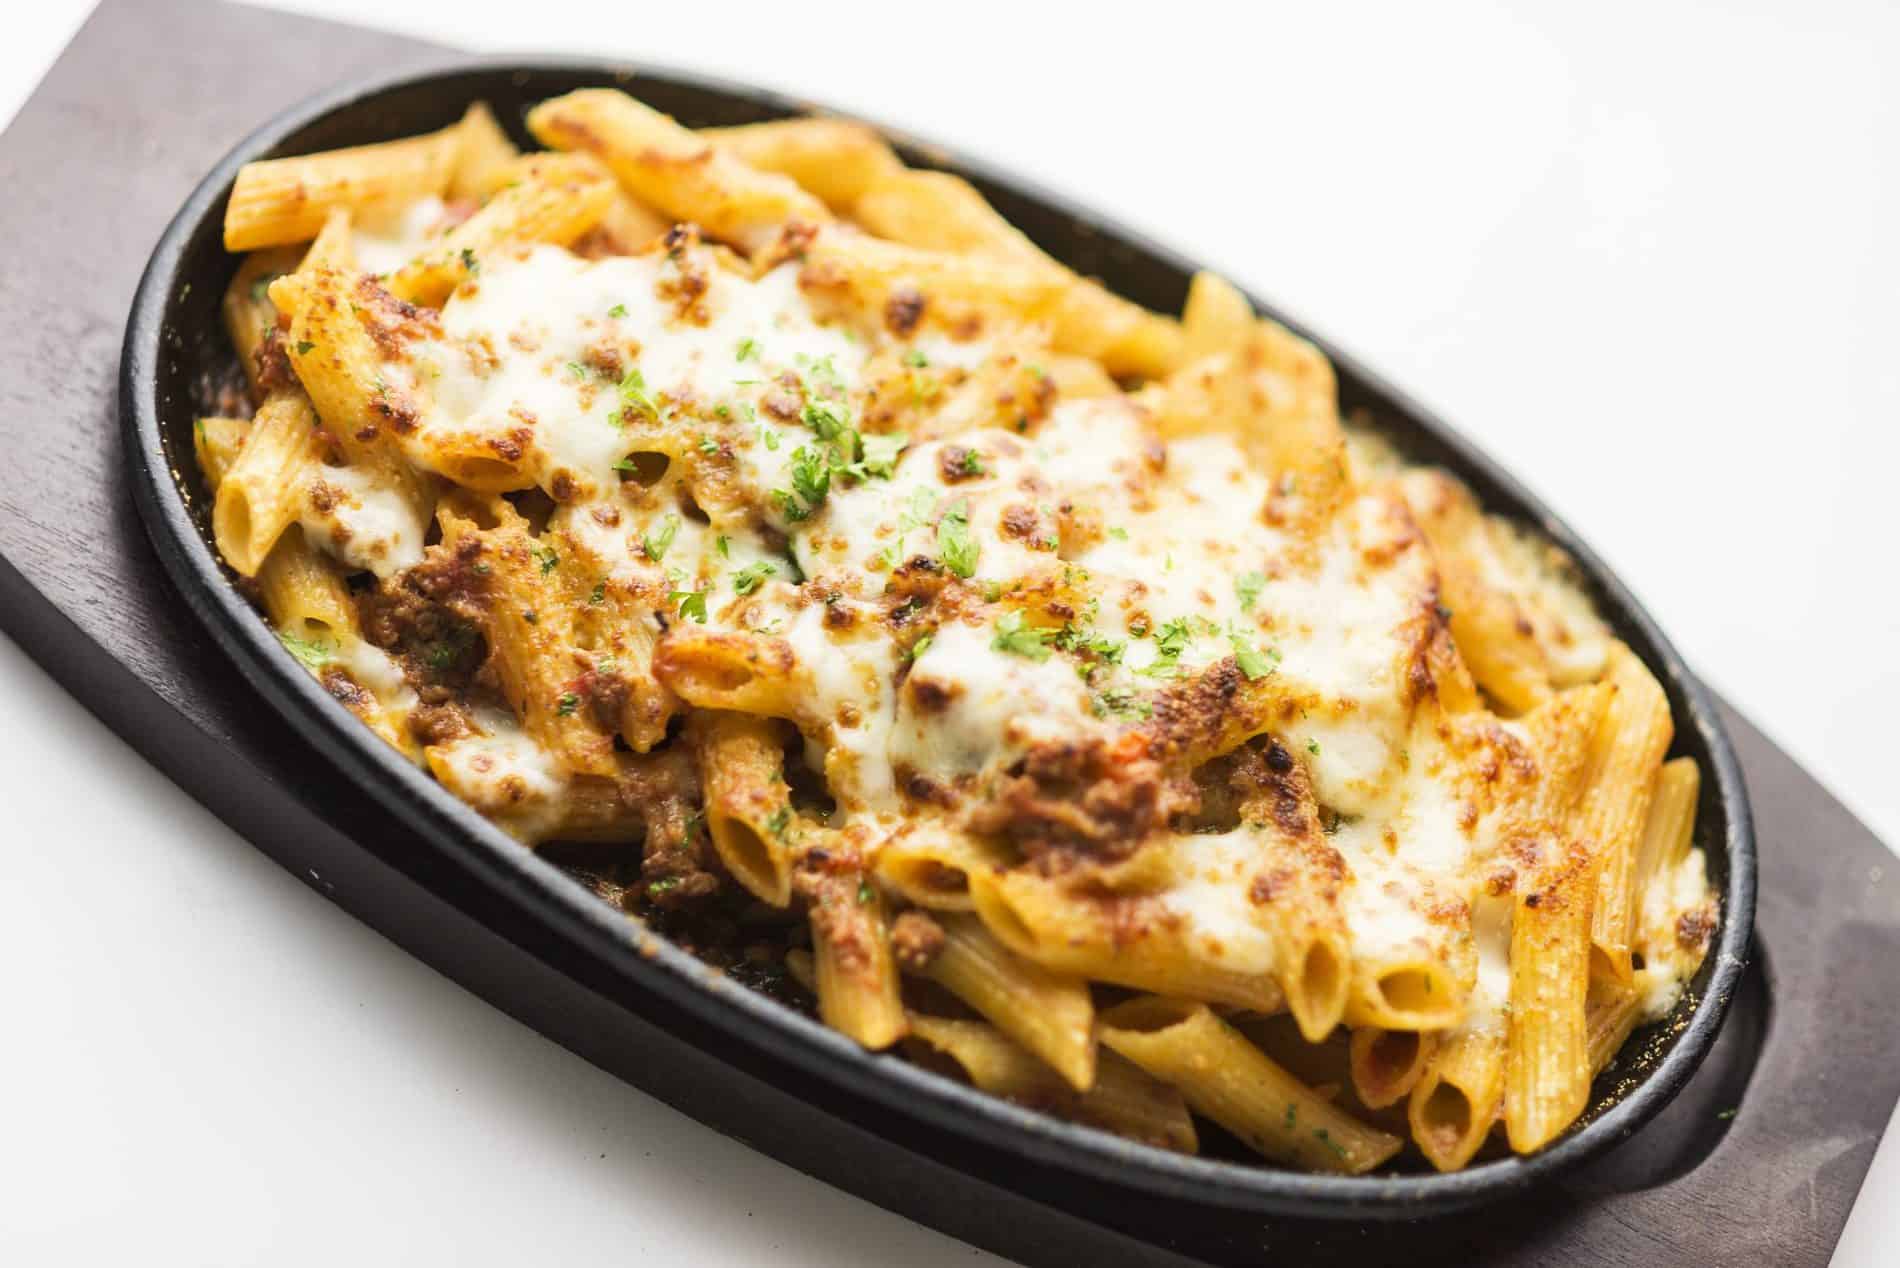 baked penne pasta with meat and cheese made with Jimmy's Taco Dip